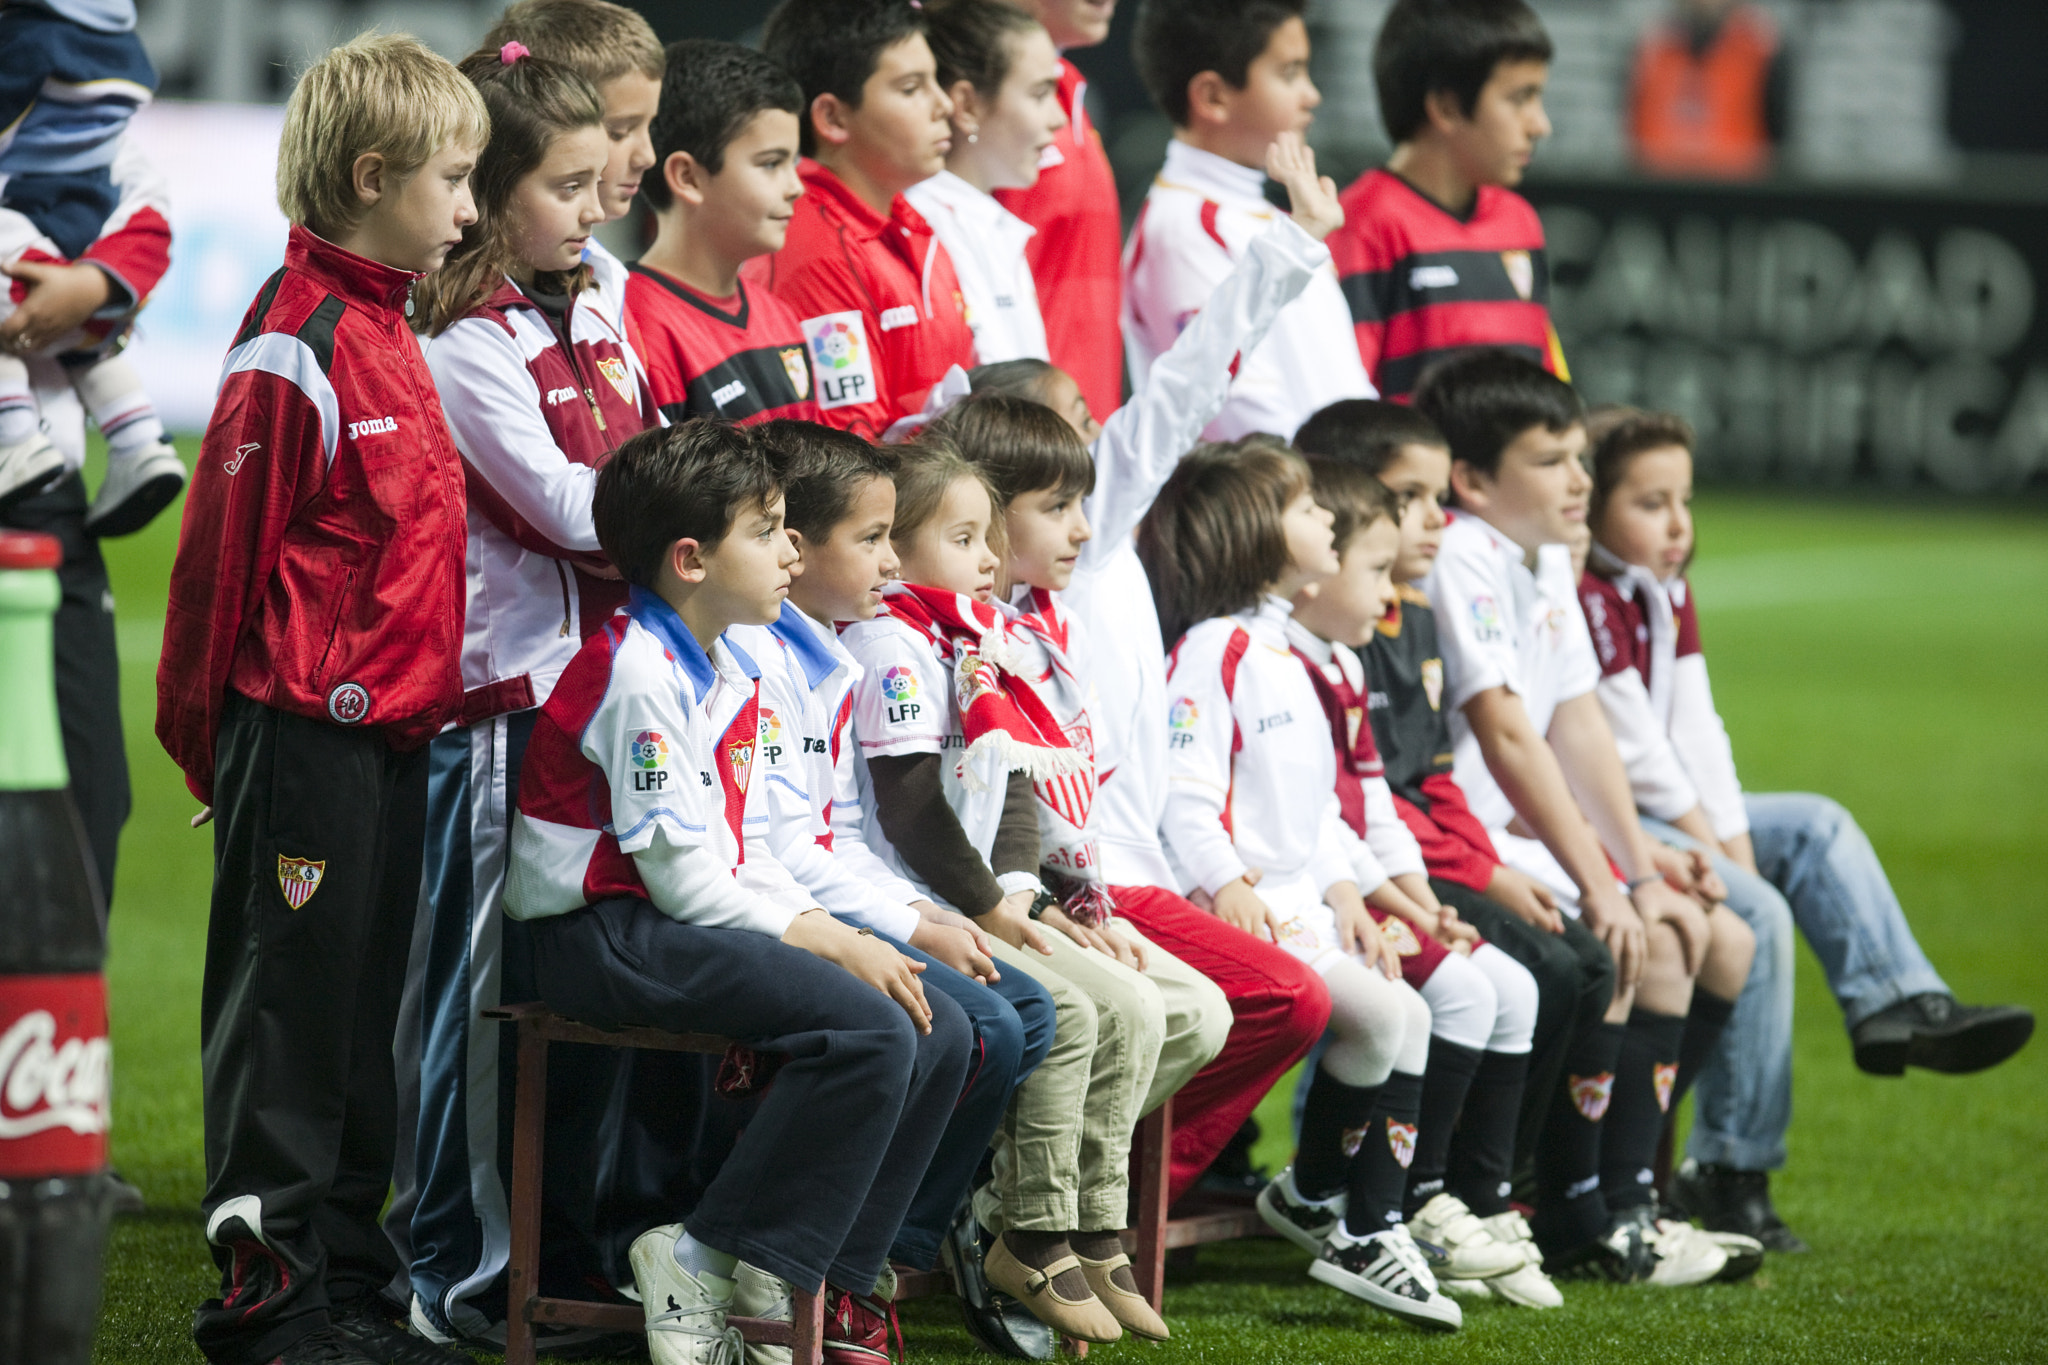 Young Sevilla FC fans ready to pose with the squad. Spanish Liga game between Sevilla FC and Valenci